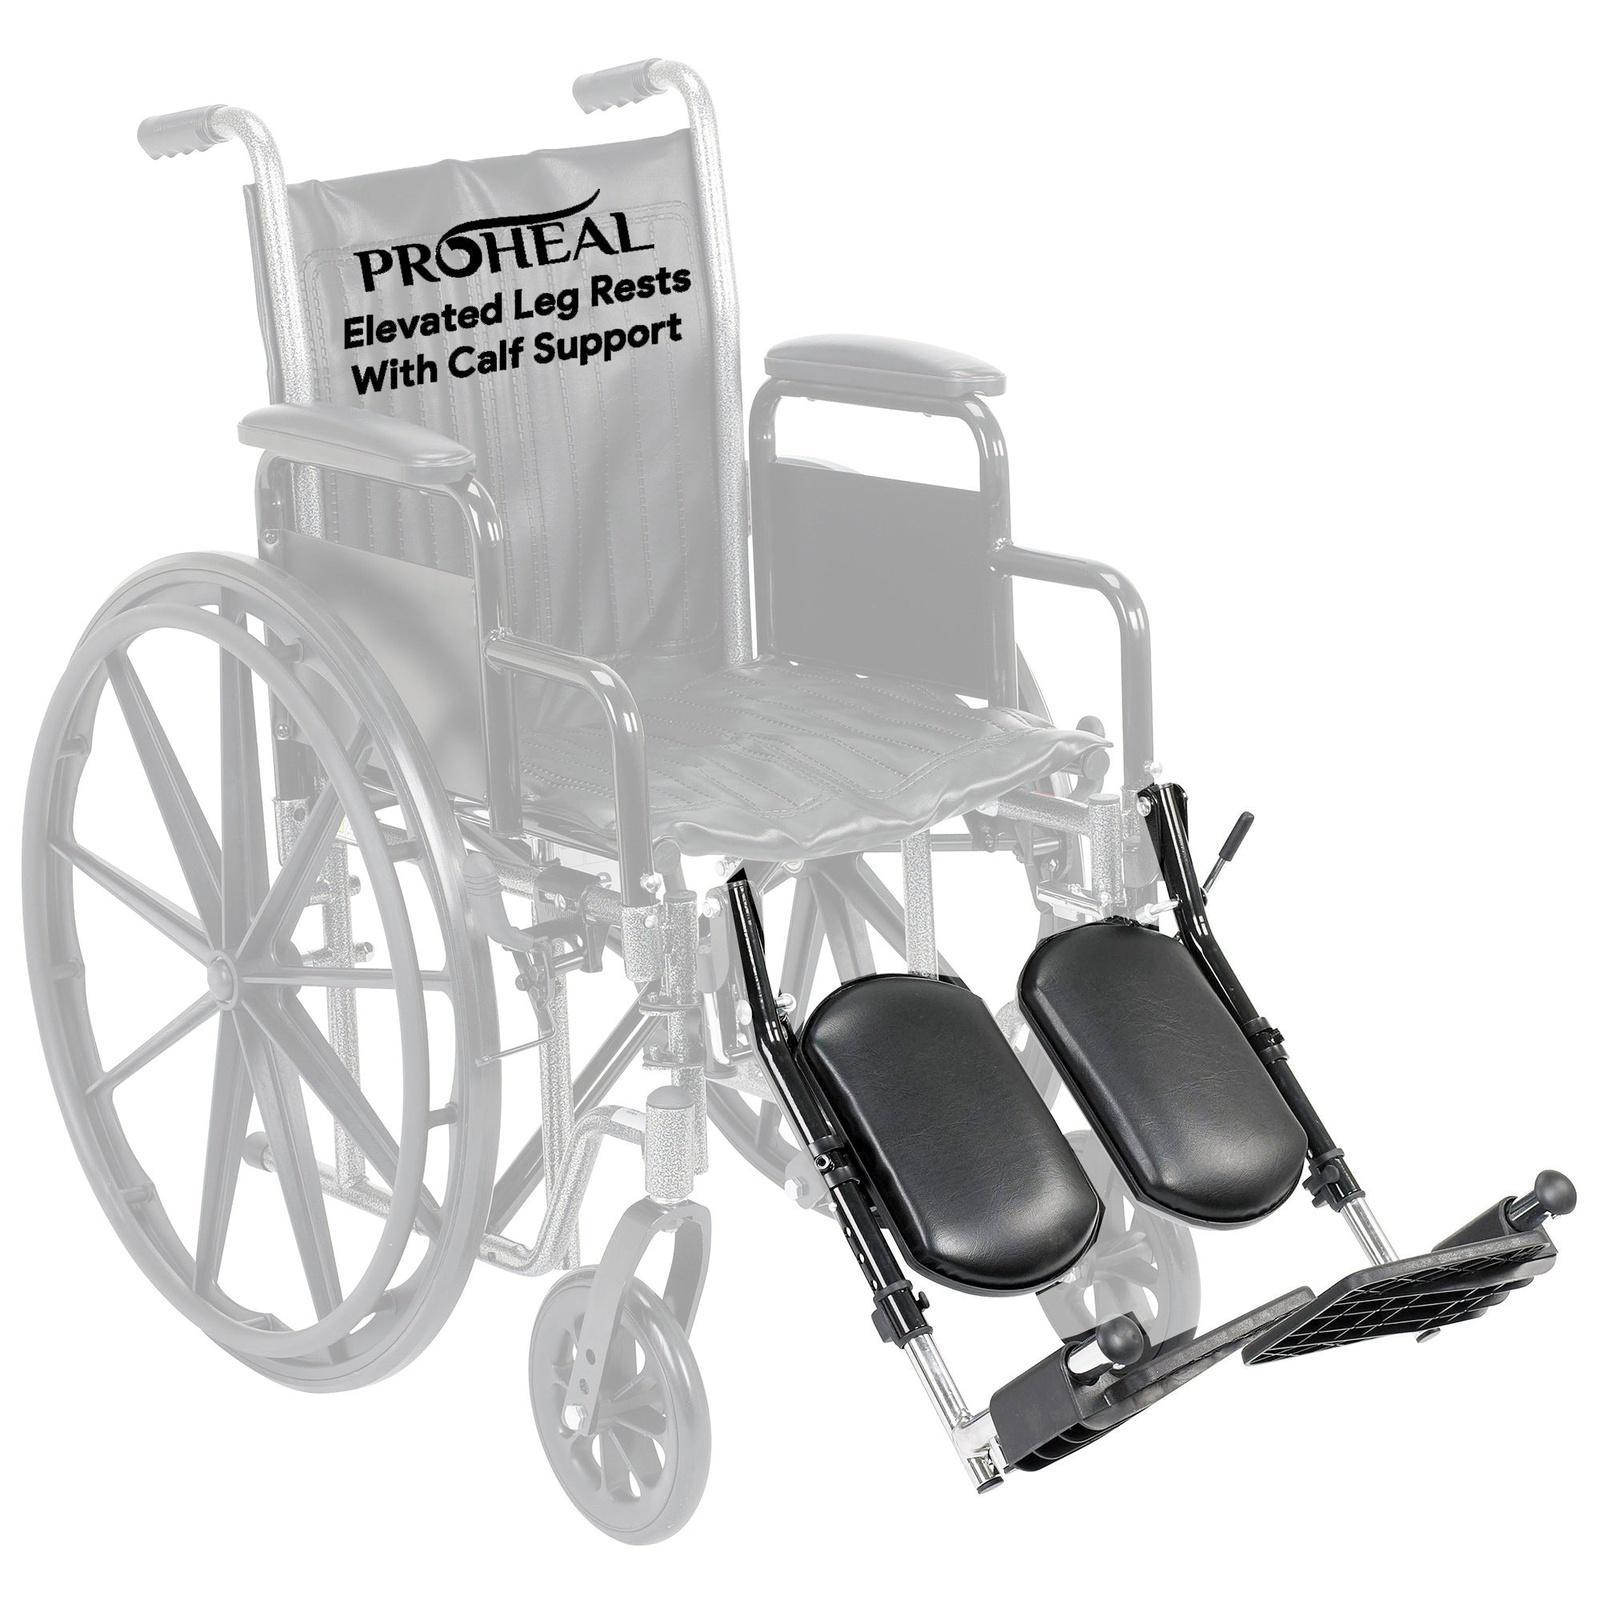 http://prohealproducts.com/cdn/shop/files/elevating-wheelchair-leg-rest-proheal-products-1.jpg?v=1689334973